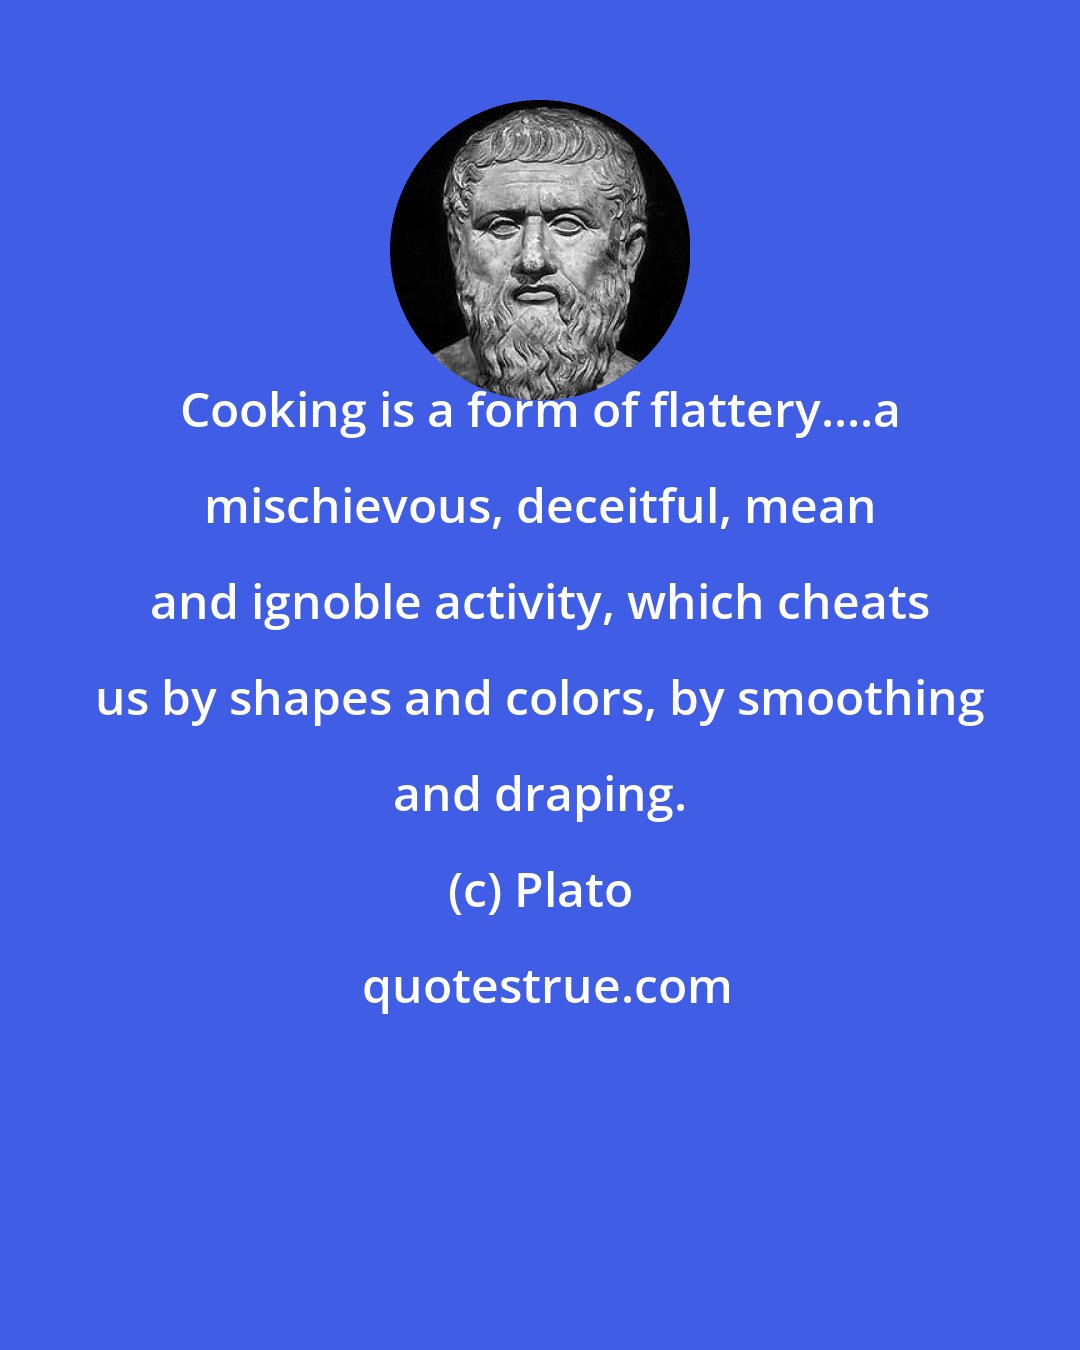 Plato: Cooking is a form of flattery....a mischievous, deceitful, mean and ignoble activity, which cheats us by shapes and colors, by smoothing and draping.